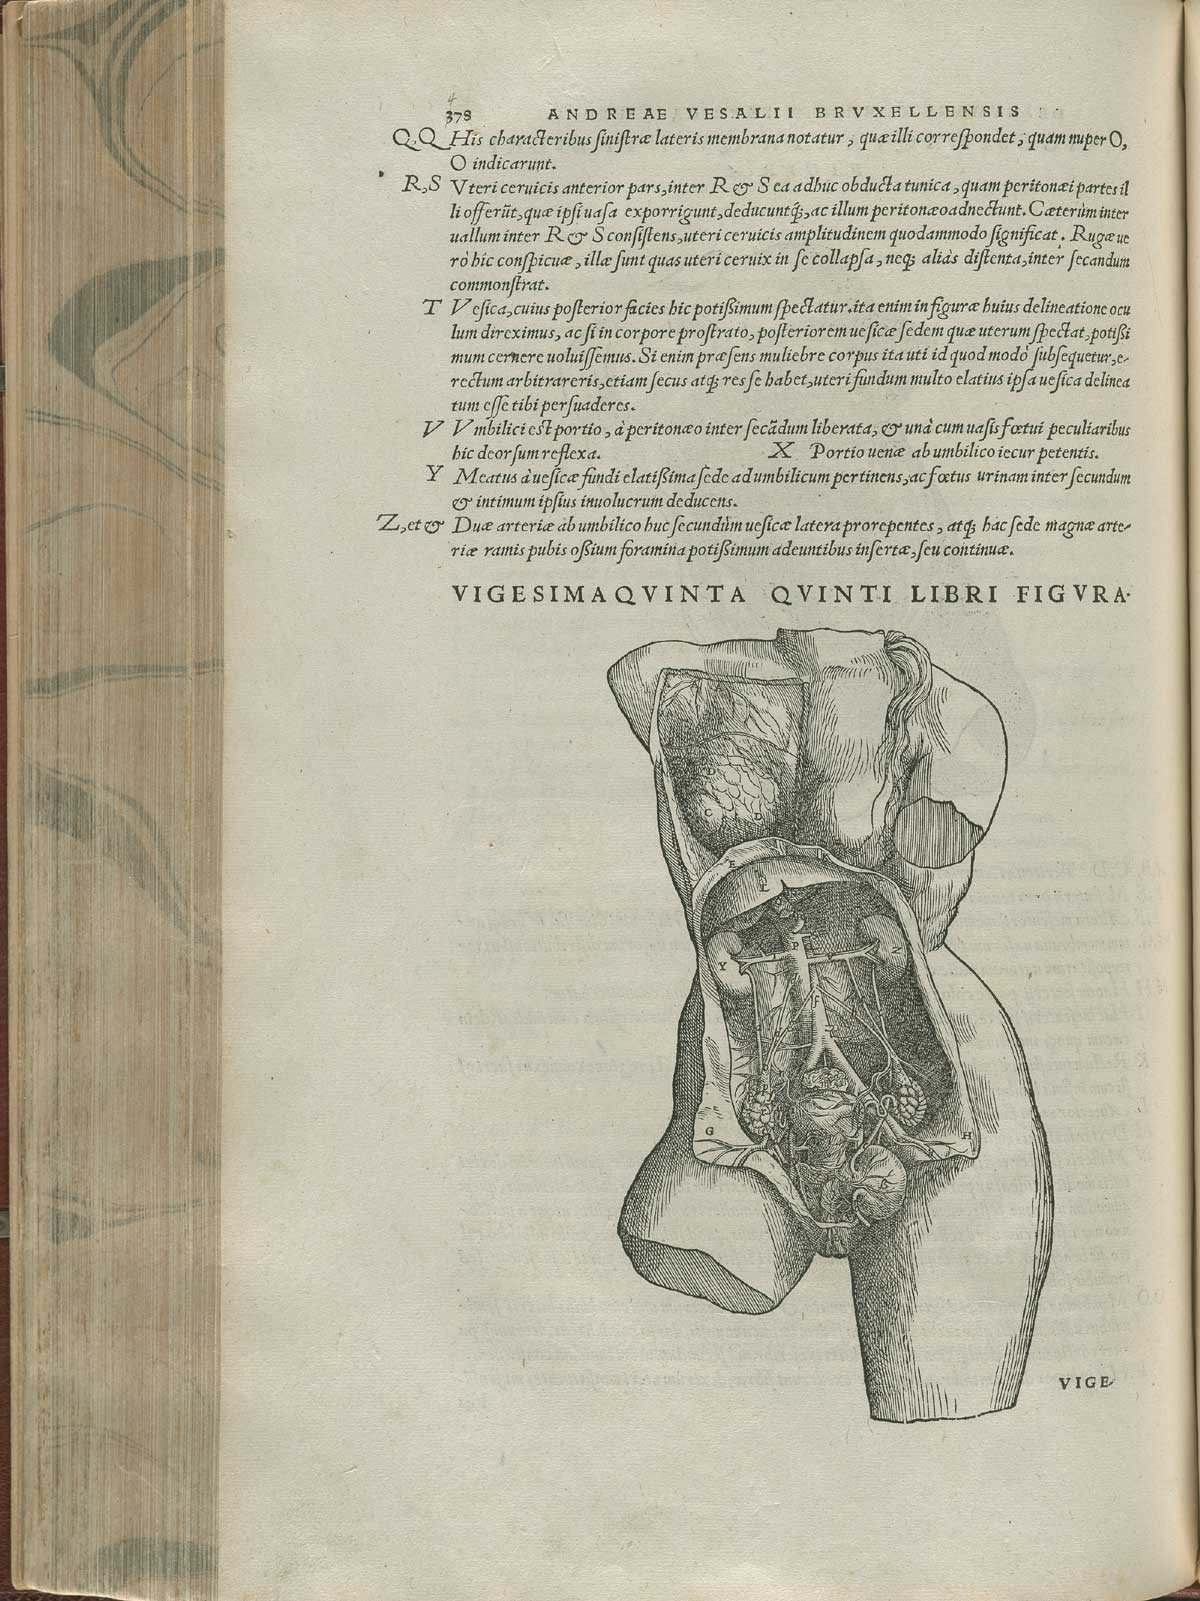 Page 478 of Andreas Vesalius' De corporis humani fabrica libri septem, featuring the illustrated woodcut of the female abdominal cavity exposed to show the genito-urinary system.